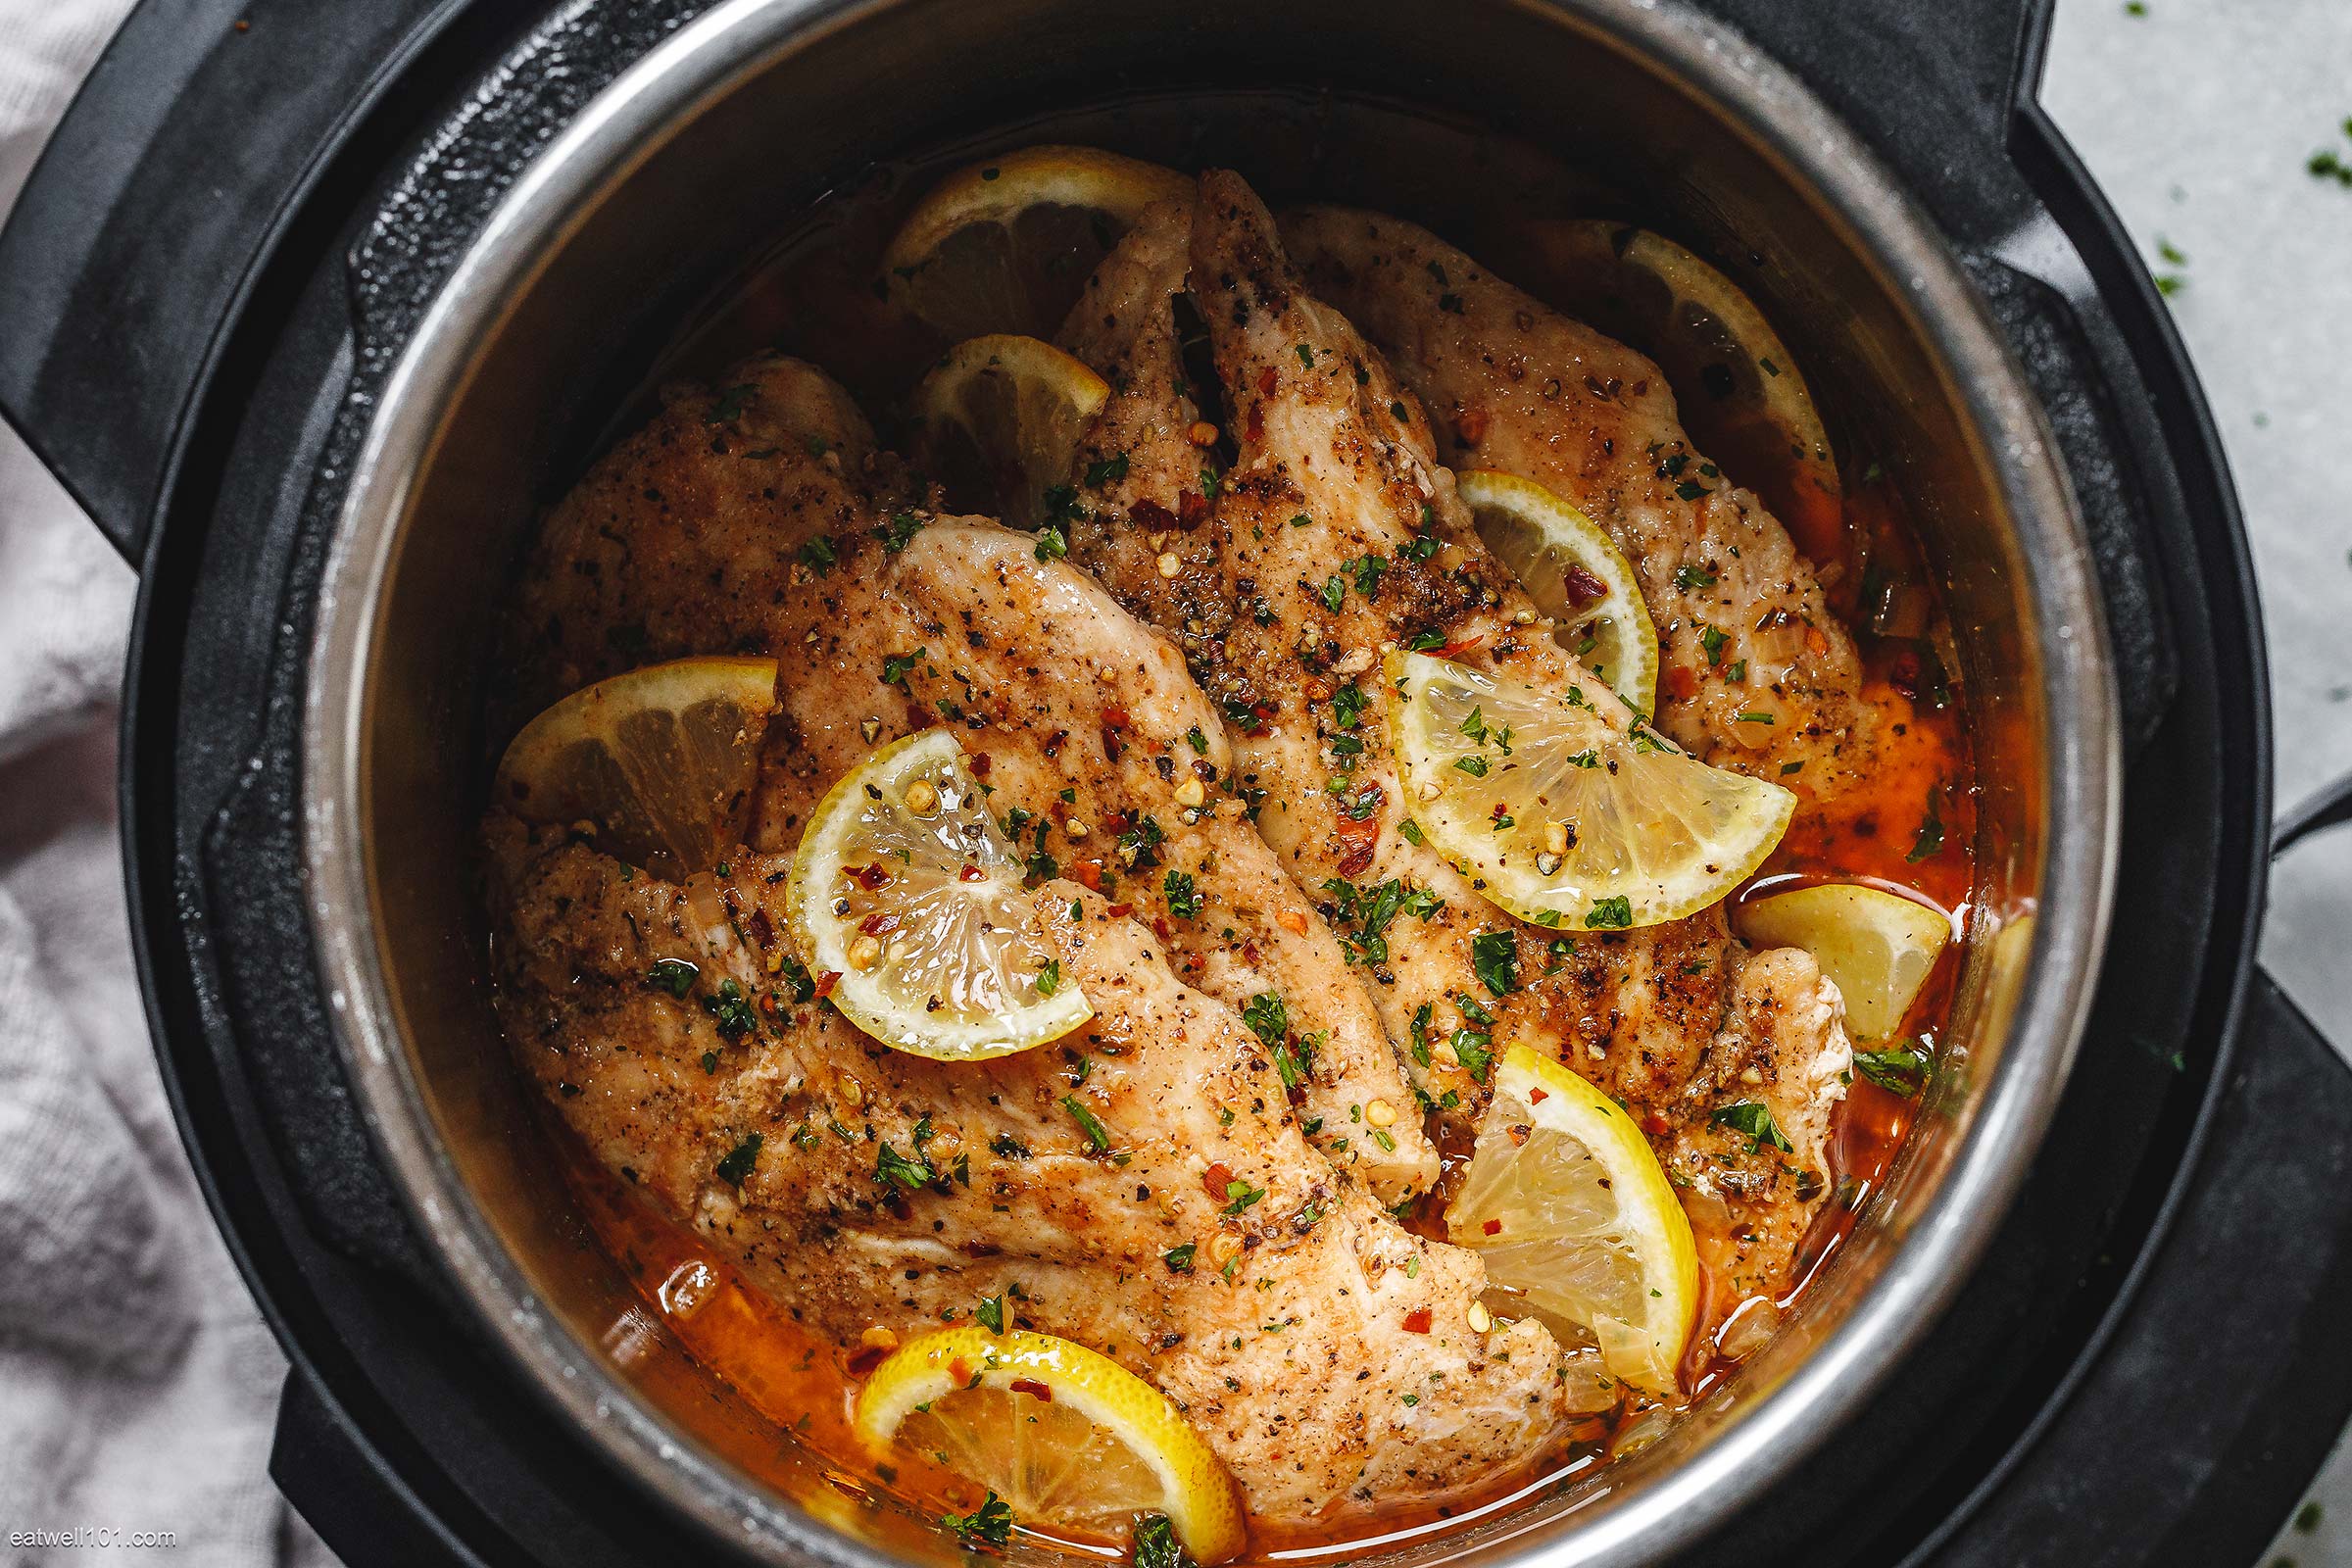 45 Instant pot Chicken Recipes - Eating on a Dime